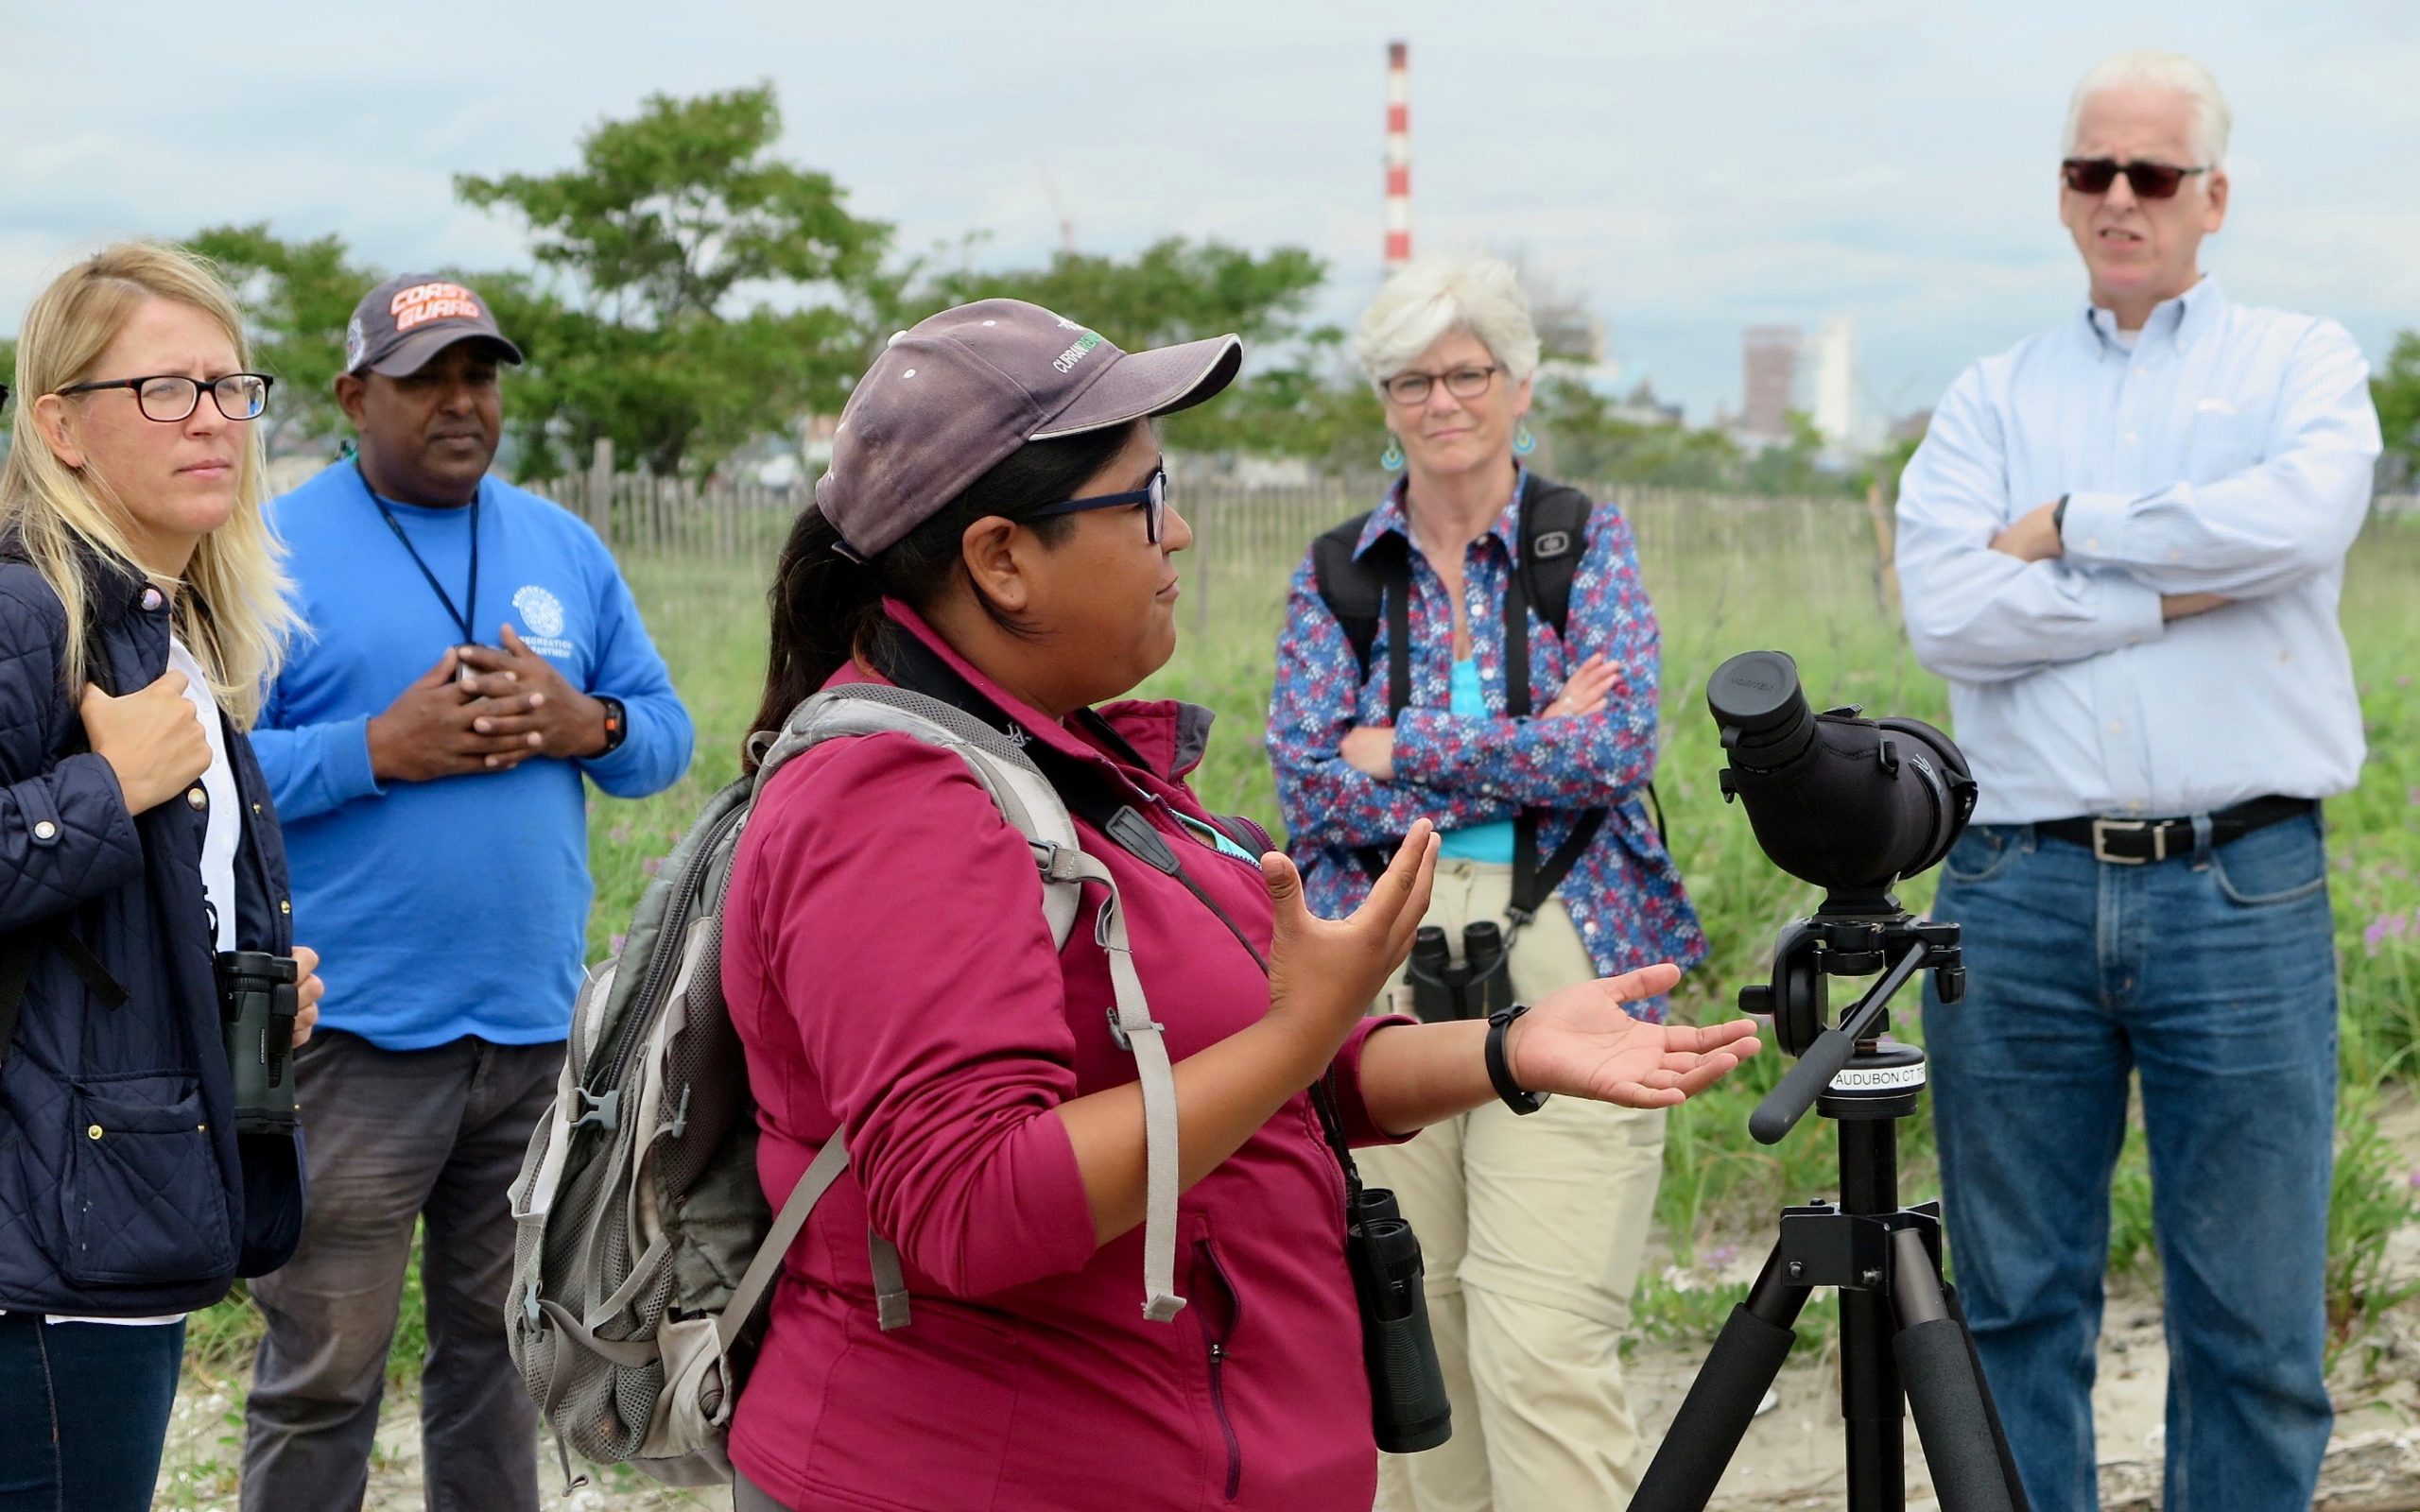 A resource manager at Audubon Connecticut discusses coastal bird monitoring to the Citizens Advisory Committee at Pleasure Beach in Bridgeport, CT.